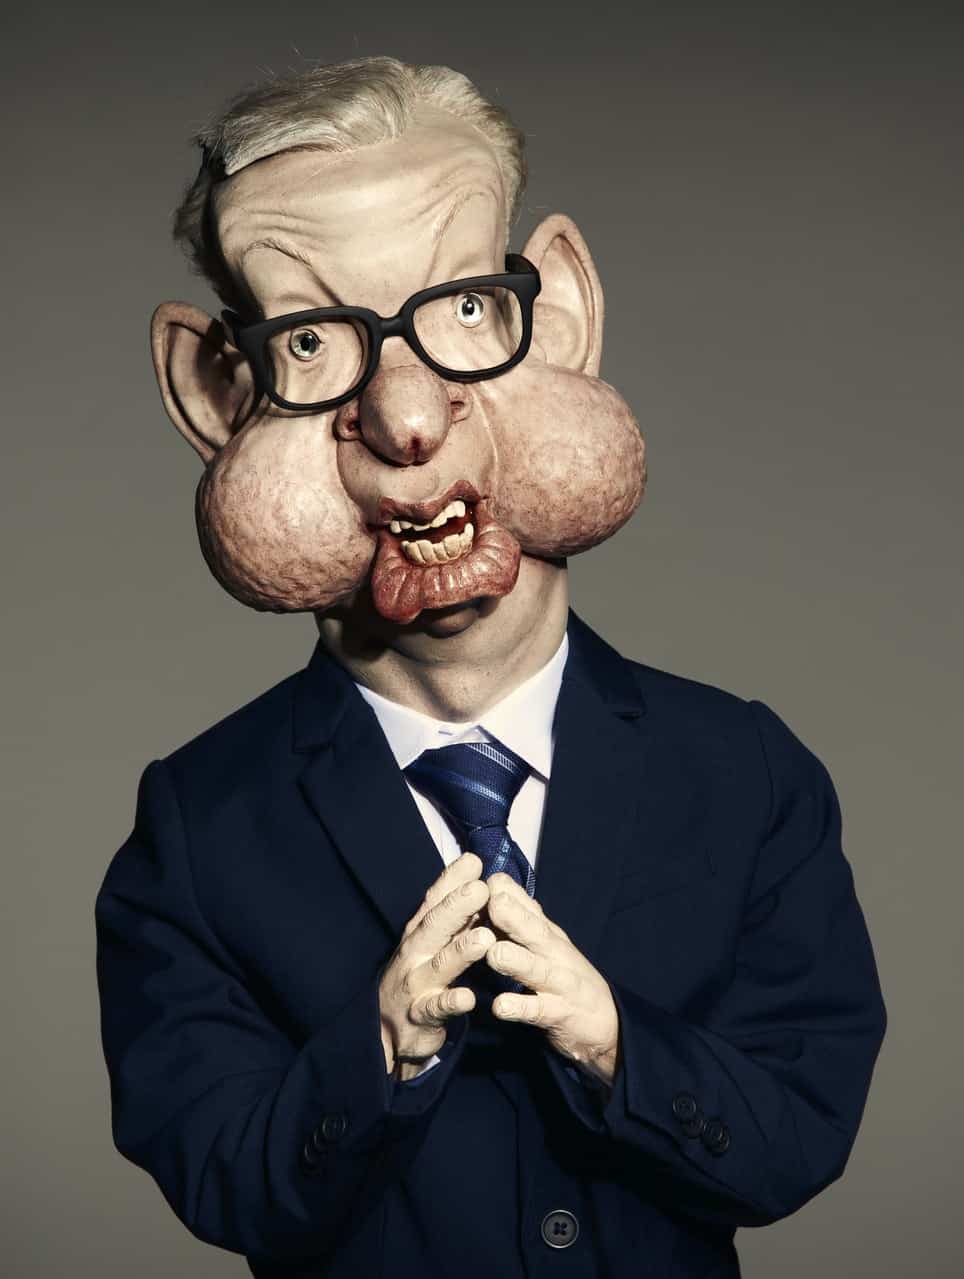 More Spitting Image puppets unveiled ahead of the show’s return